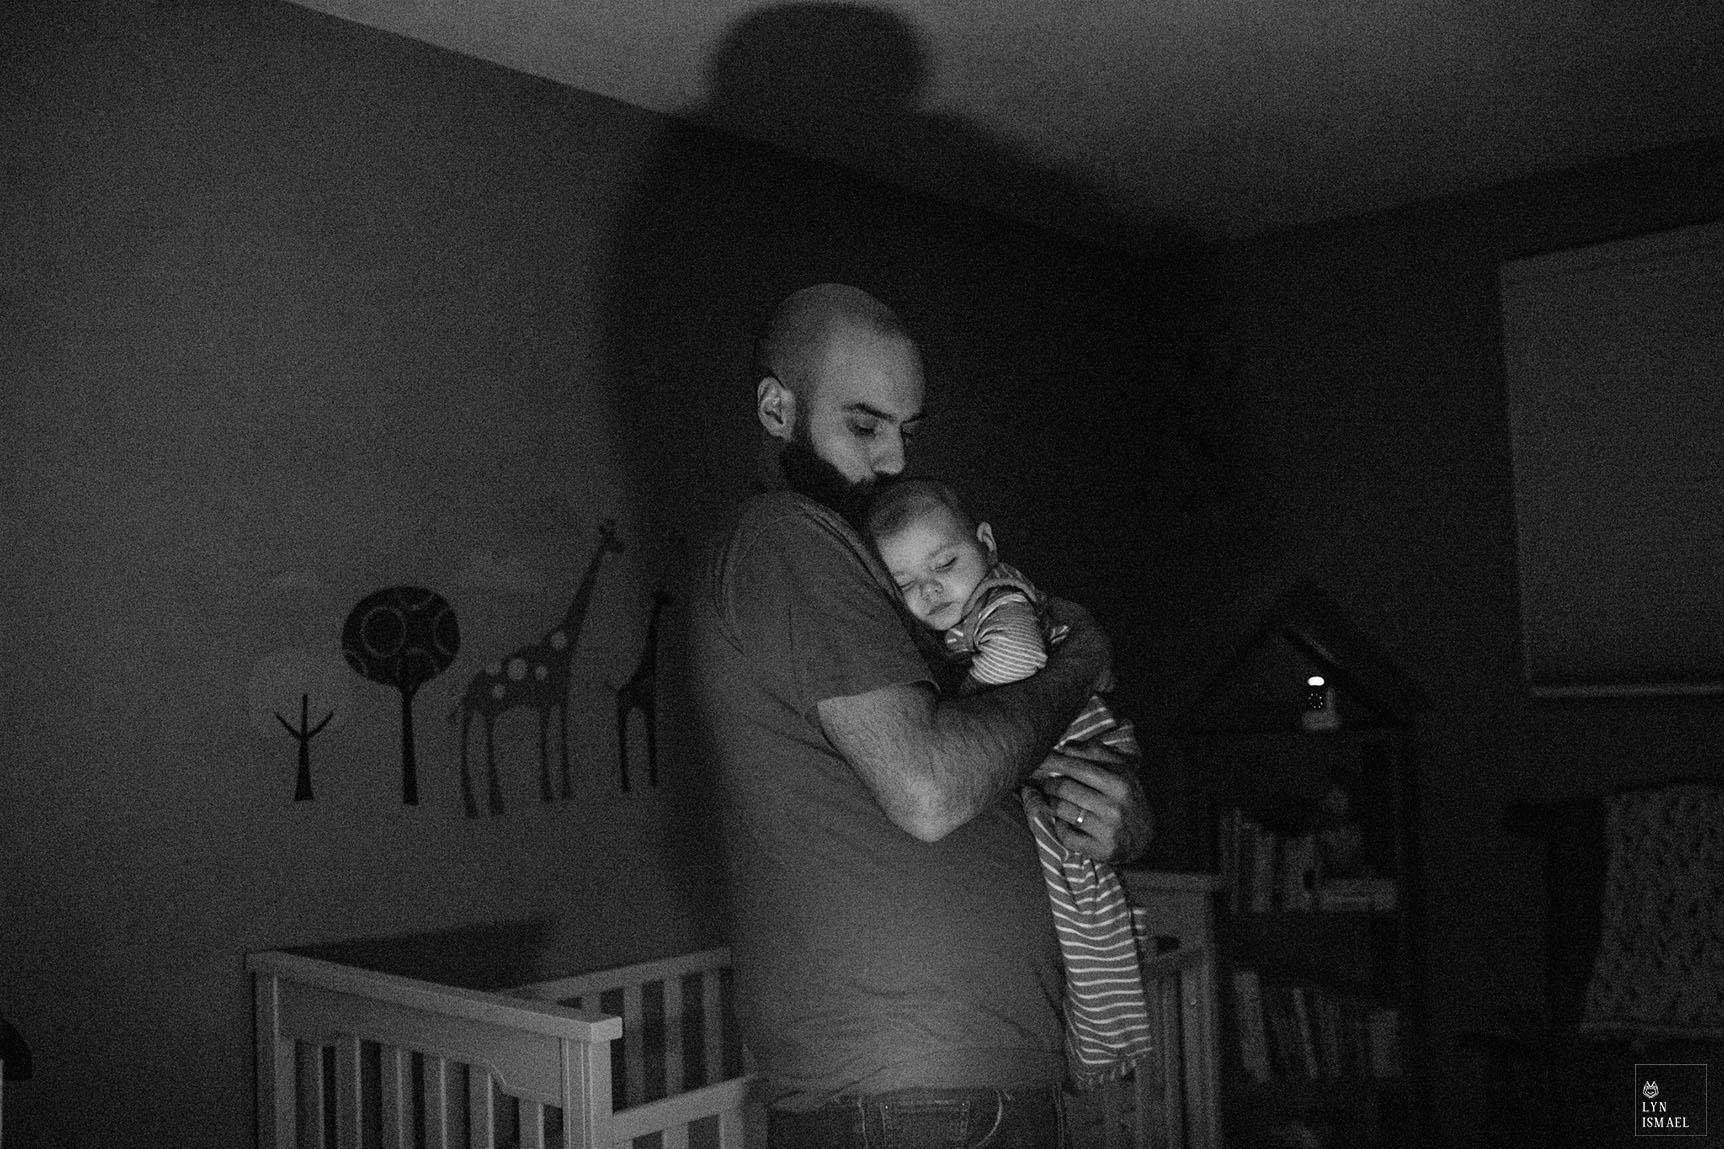 Kitchener family documentary photographer captures a father putting his son to sleep.